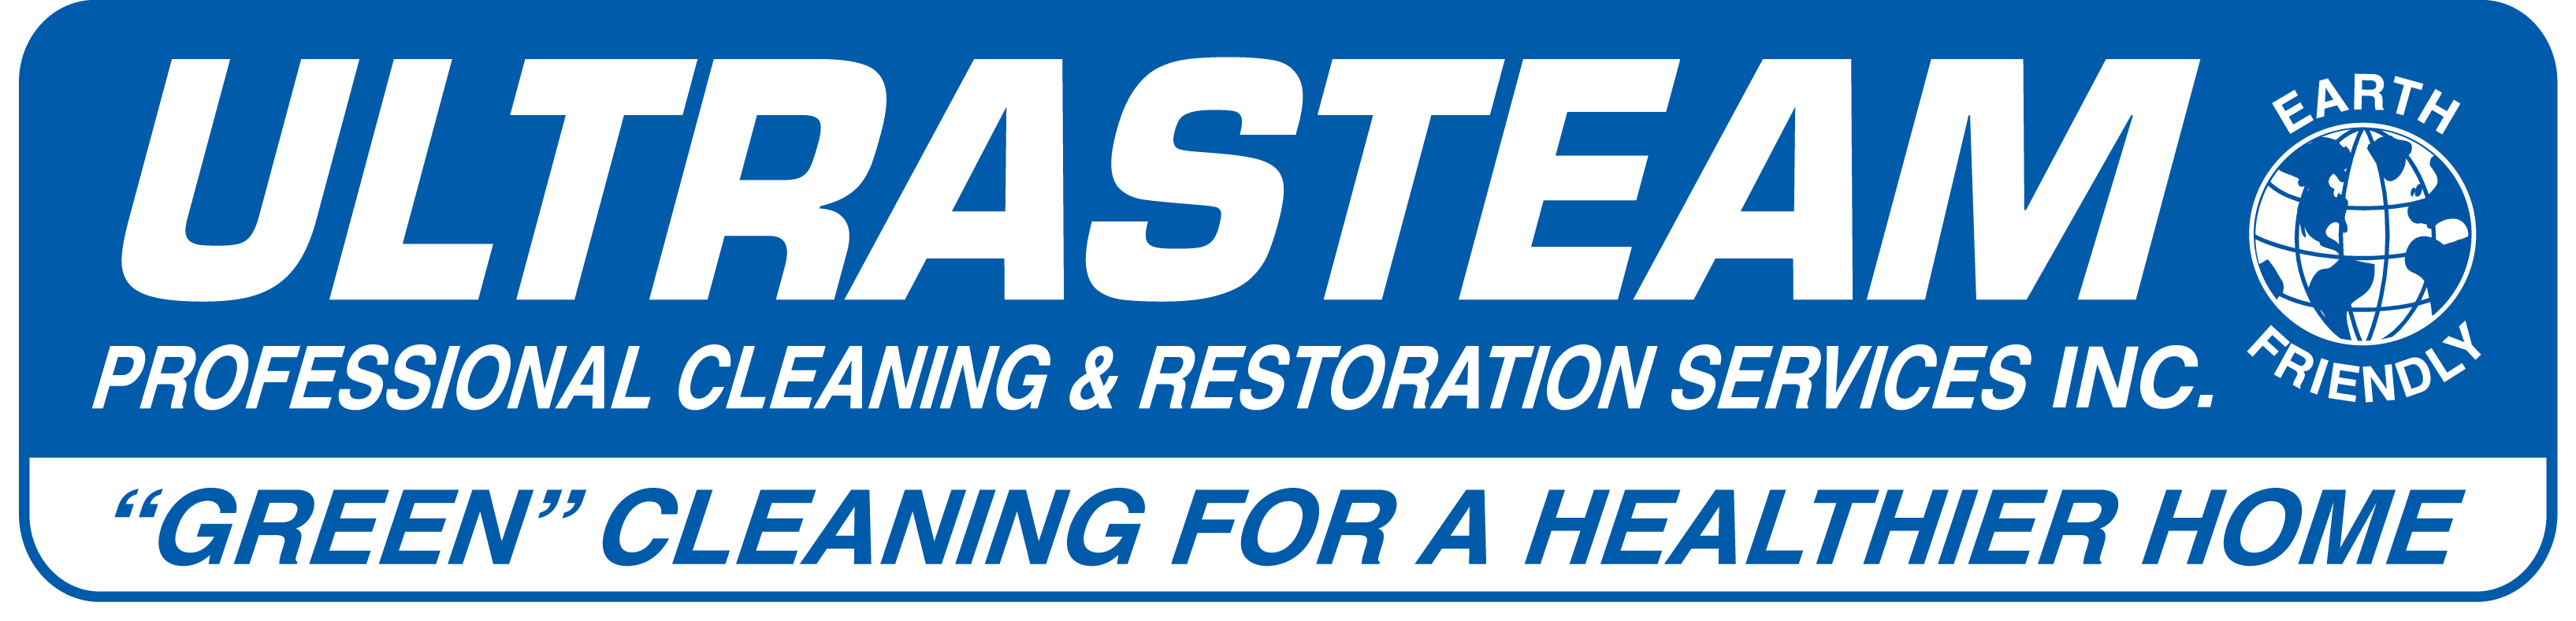 UltraSteam Professional Cleaning and Restoration Services, Inc. Logo